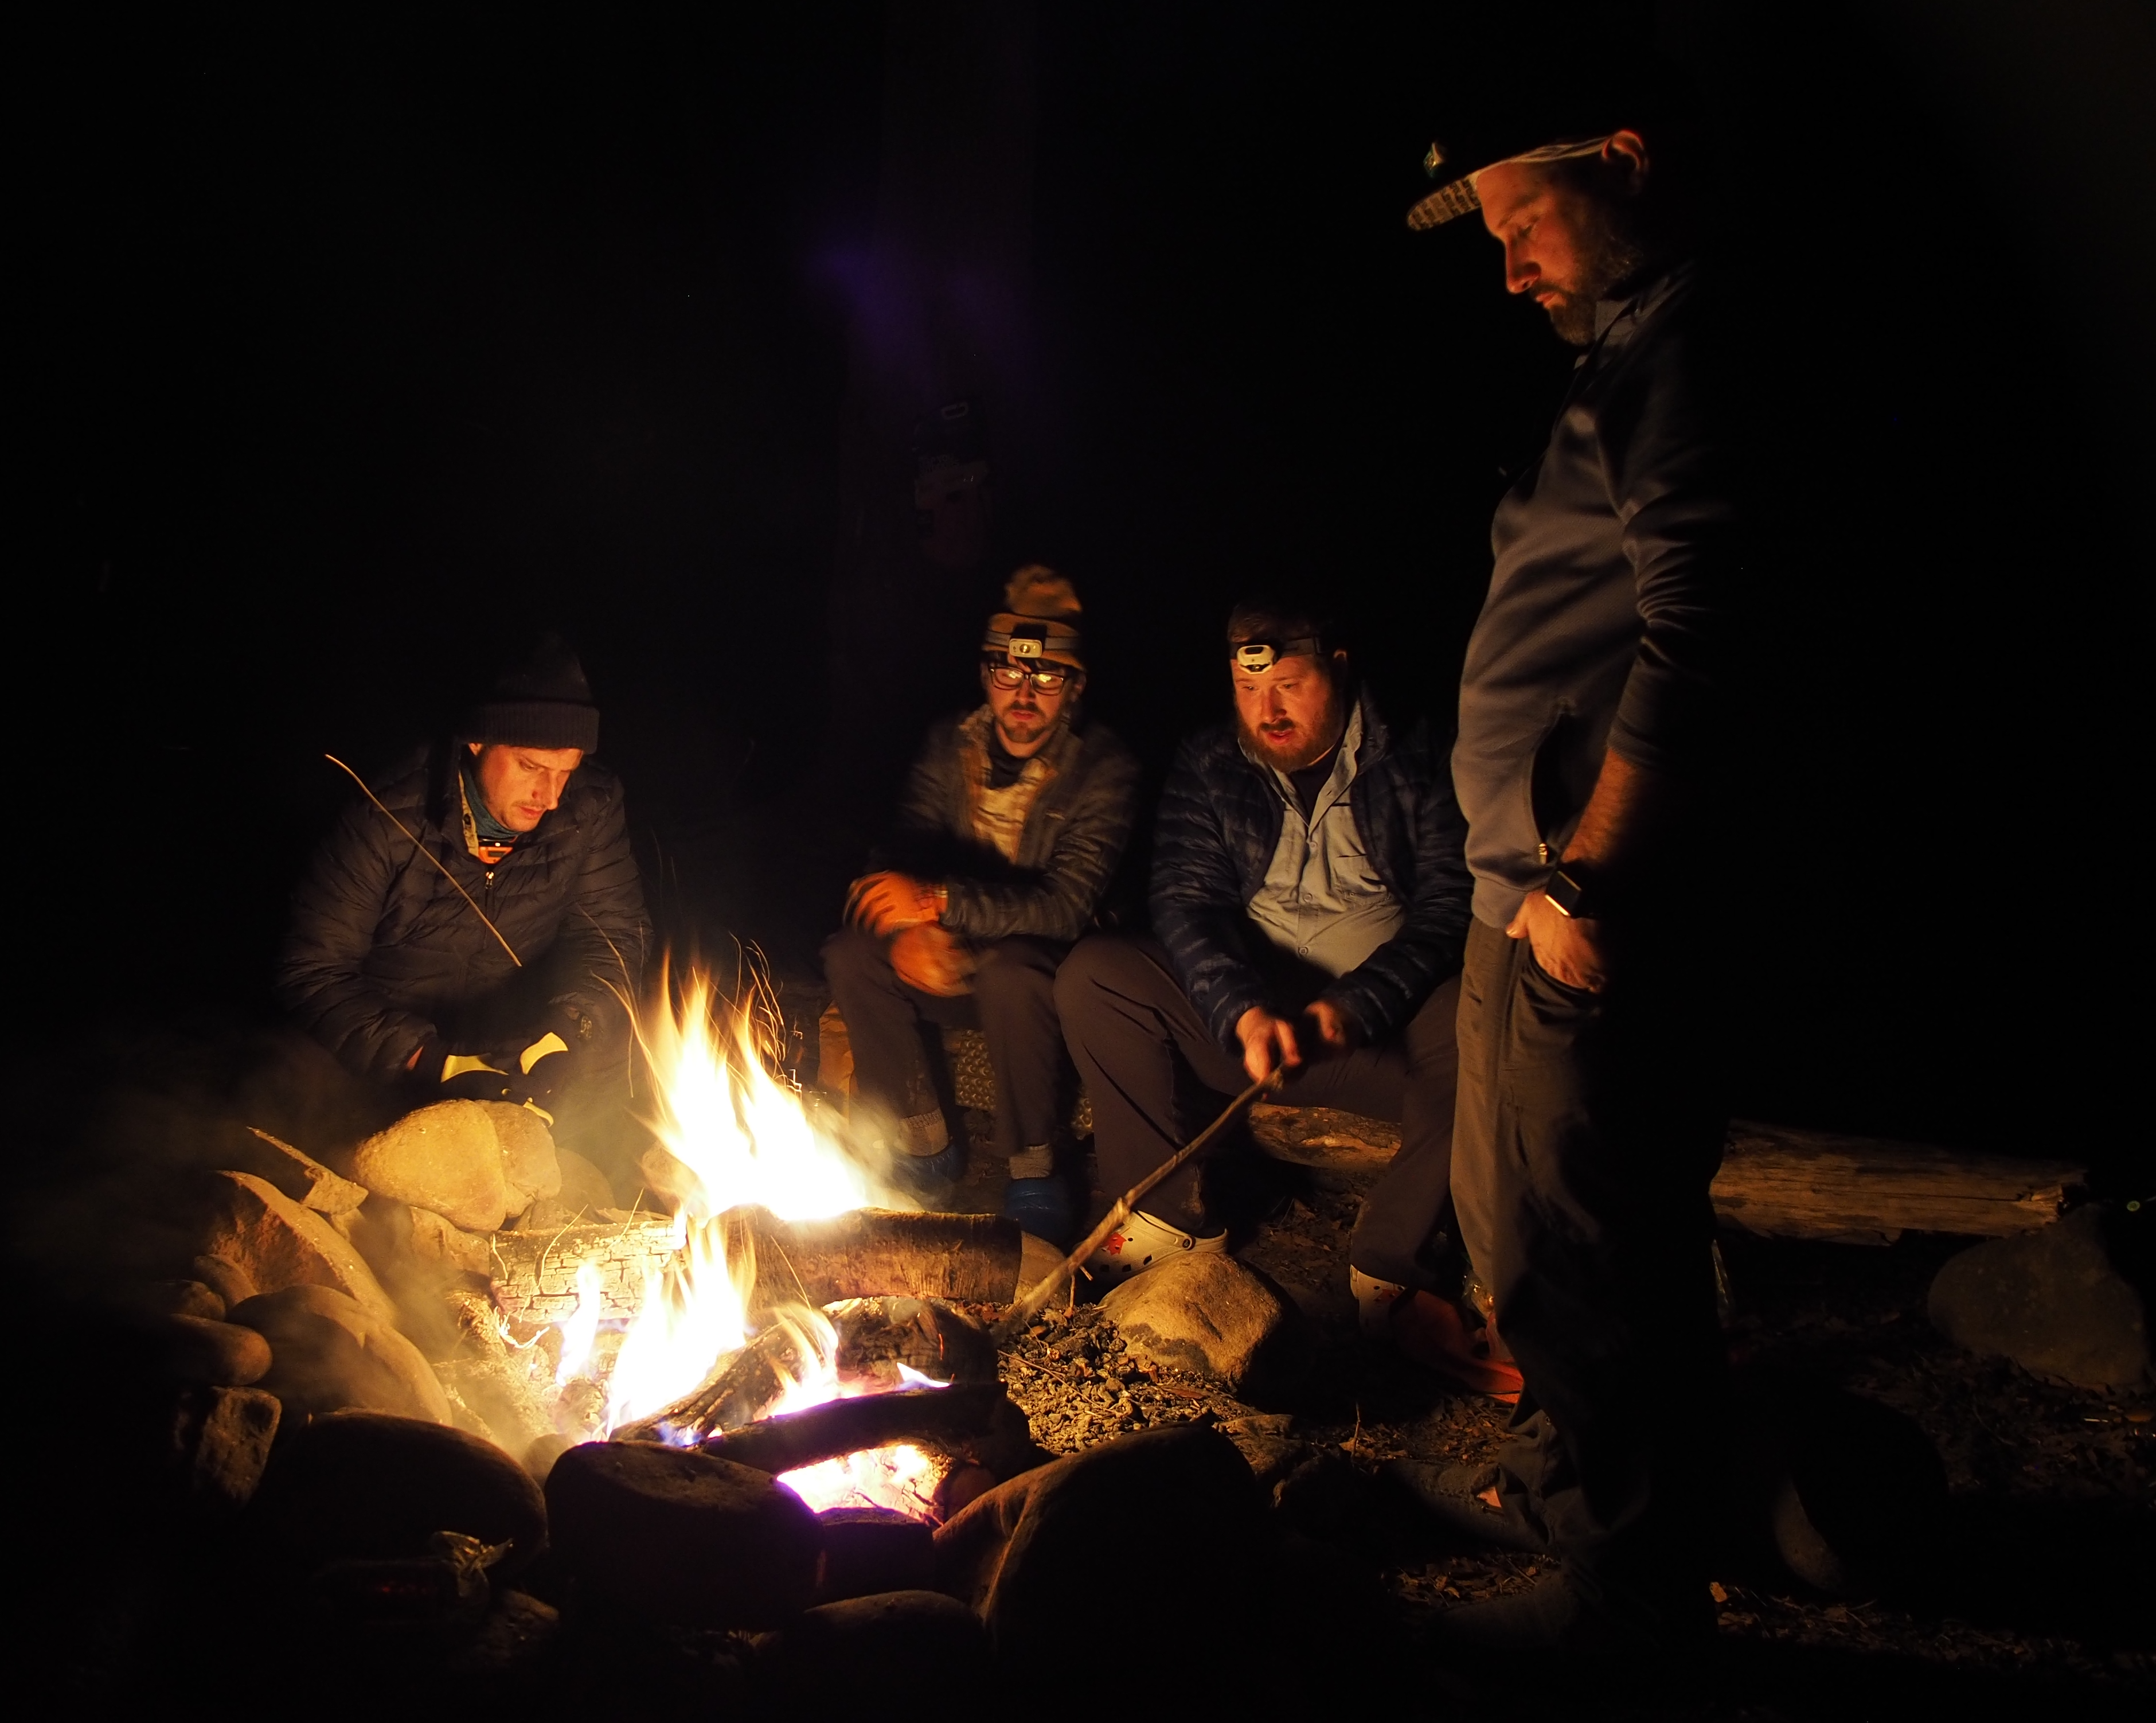 Four of the author's friends in cold weather clothing around a campfire at night. Three are seated, one is standing, all are staring into the fire.